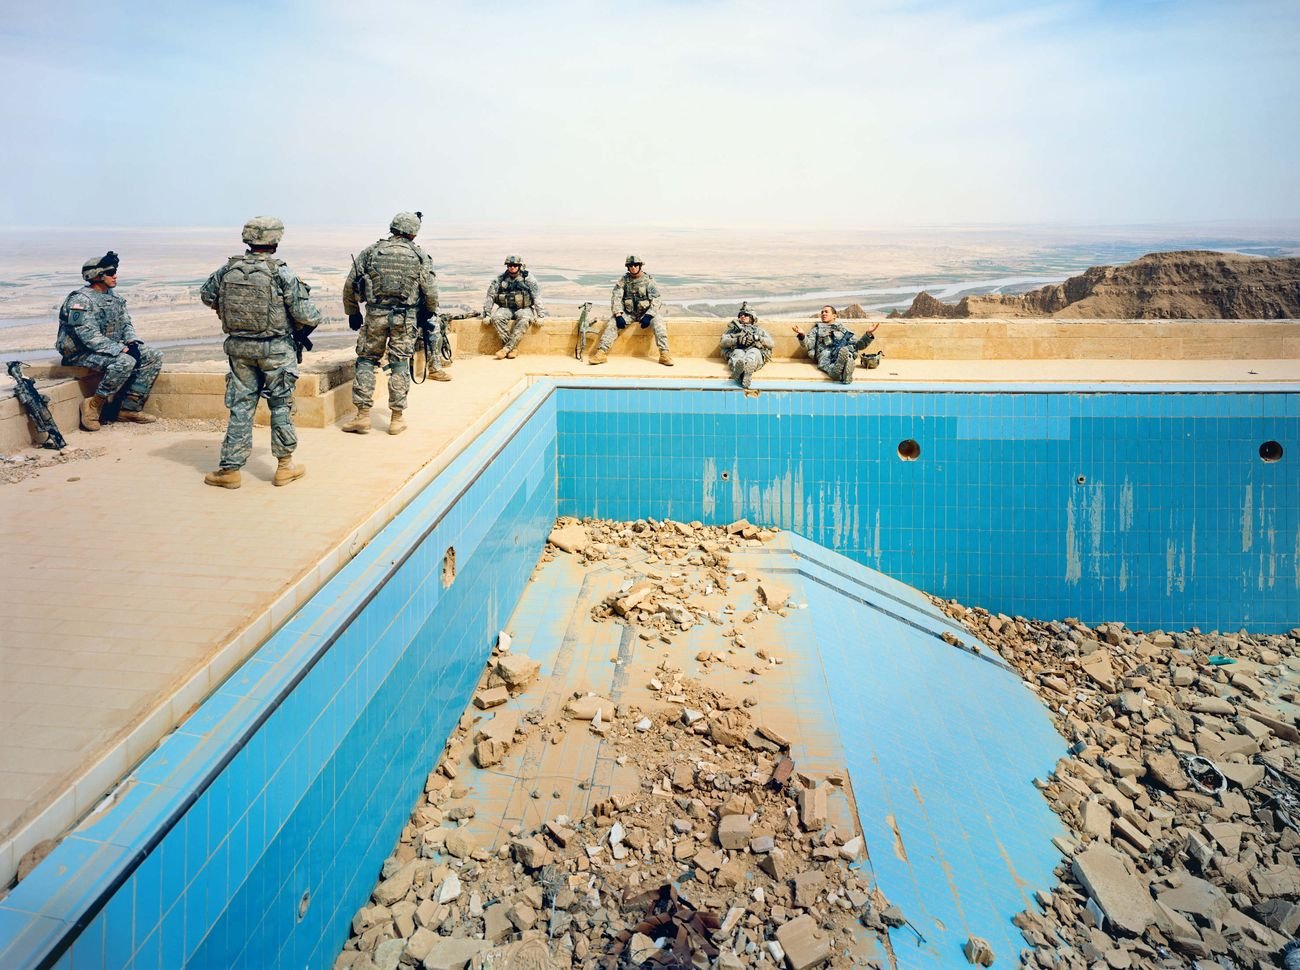 Richard Mosse, Pool at Uday’s Palace, Salah a Din Province, Iraq, 2009. Courtesy of the artist & Jack Shainman Gallery, New York © Richard Mosse